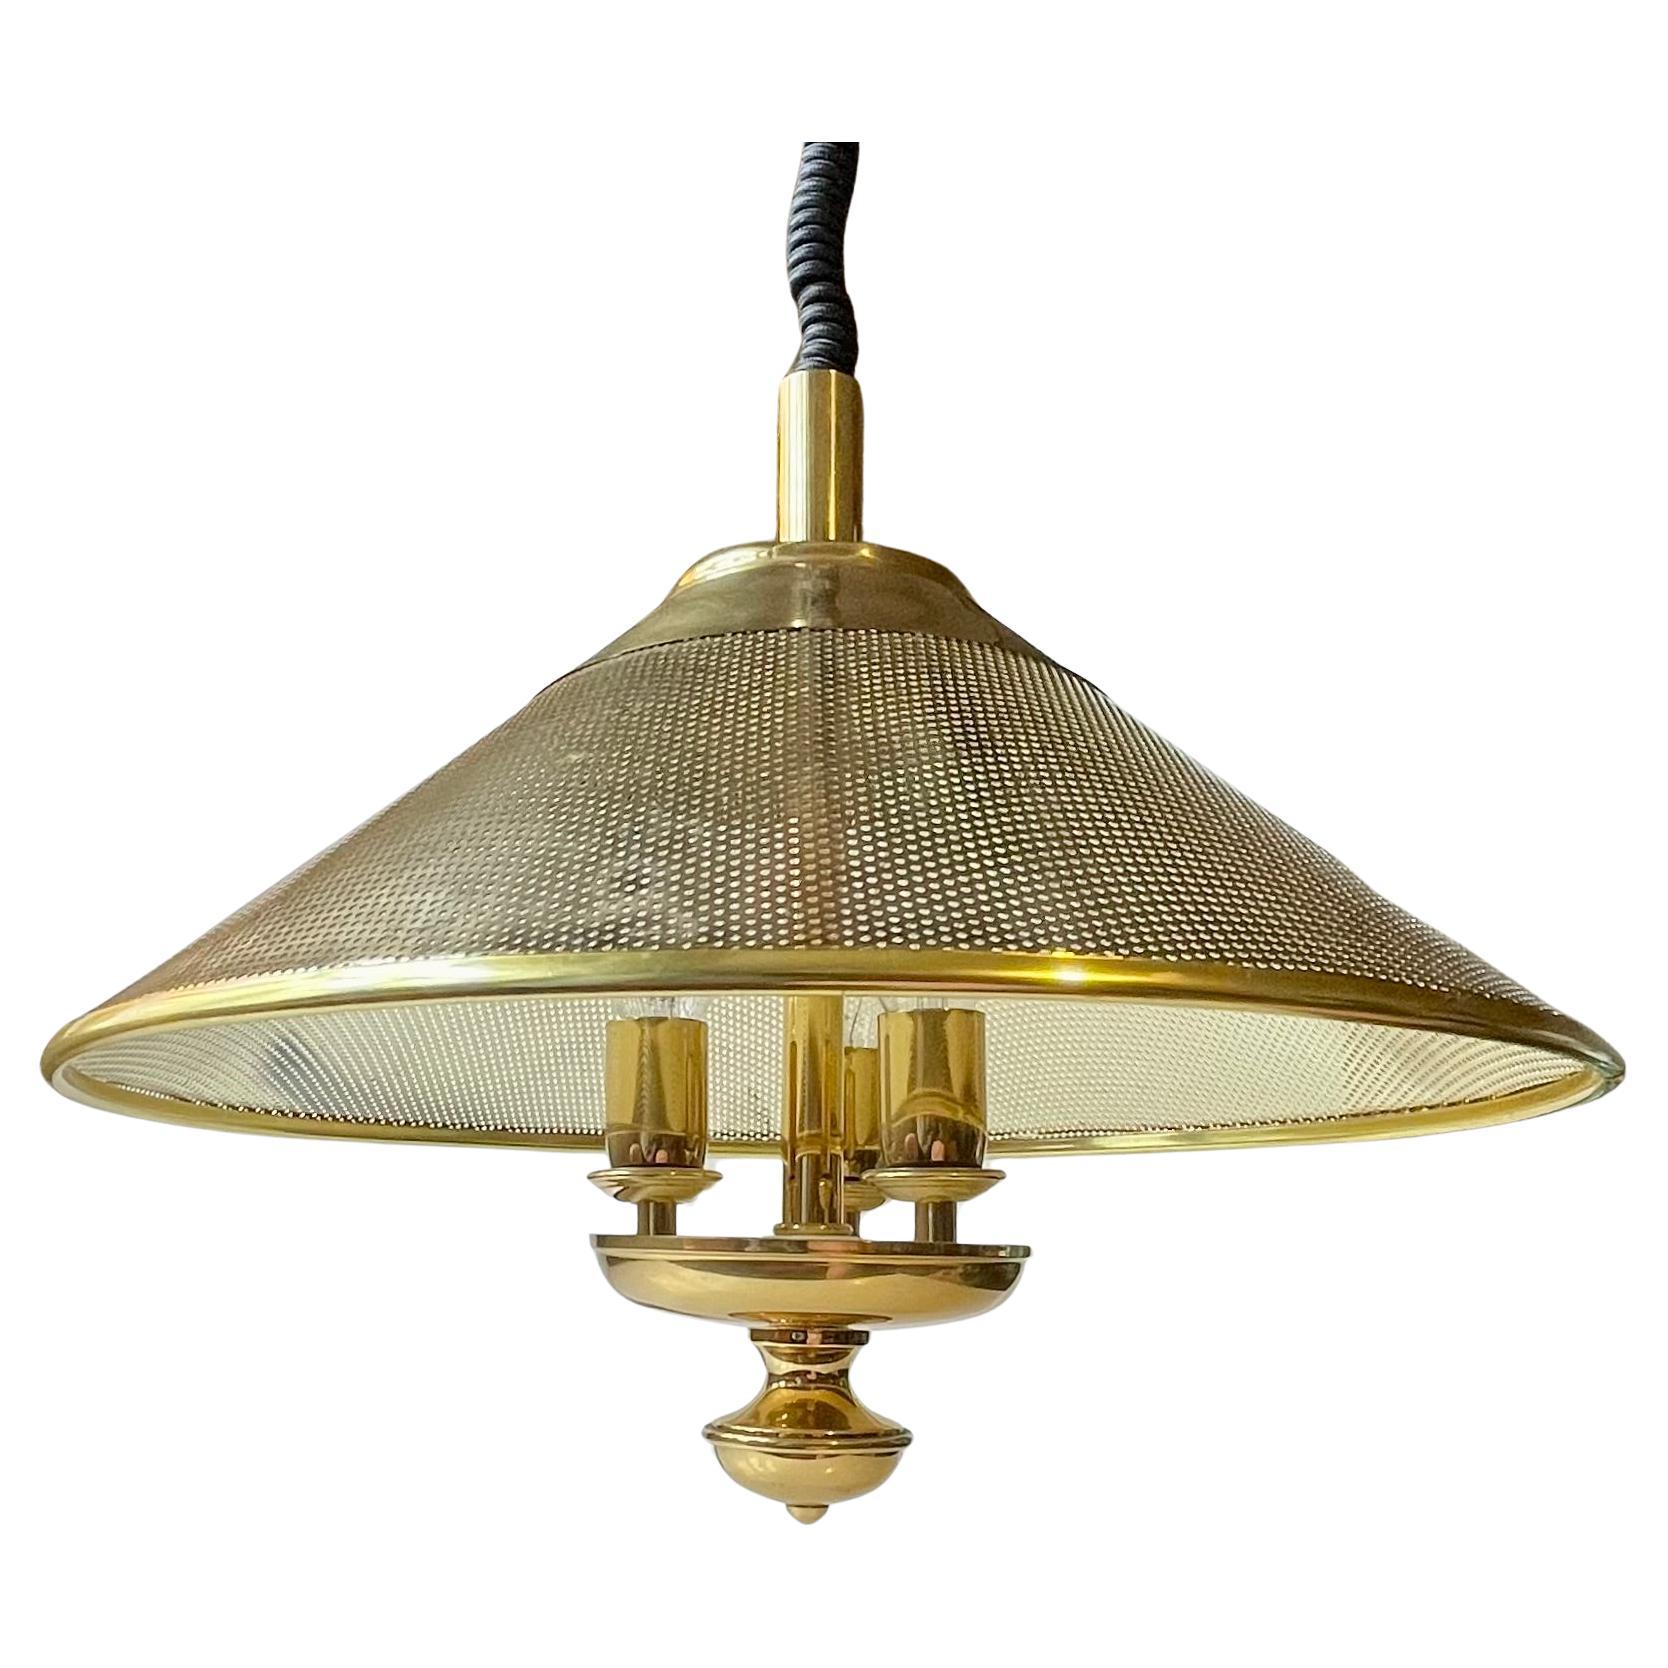 Vintage Danish Nautical Ship 's Hanging Lamp in Pierced Brass, 1970s For Sale